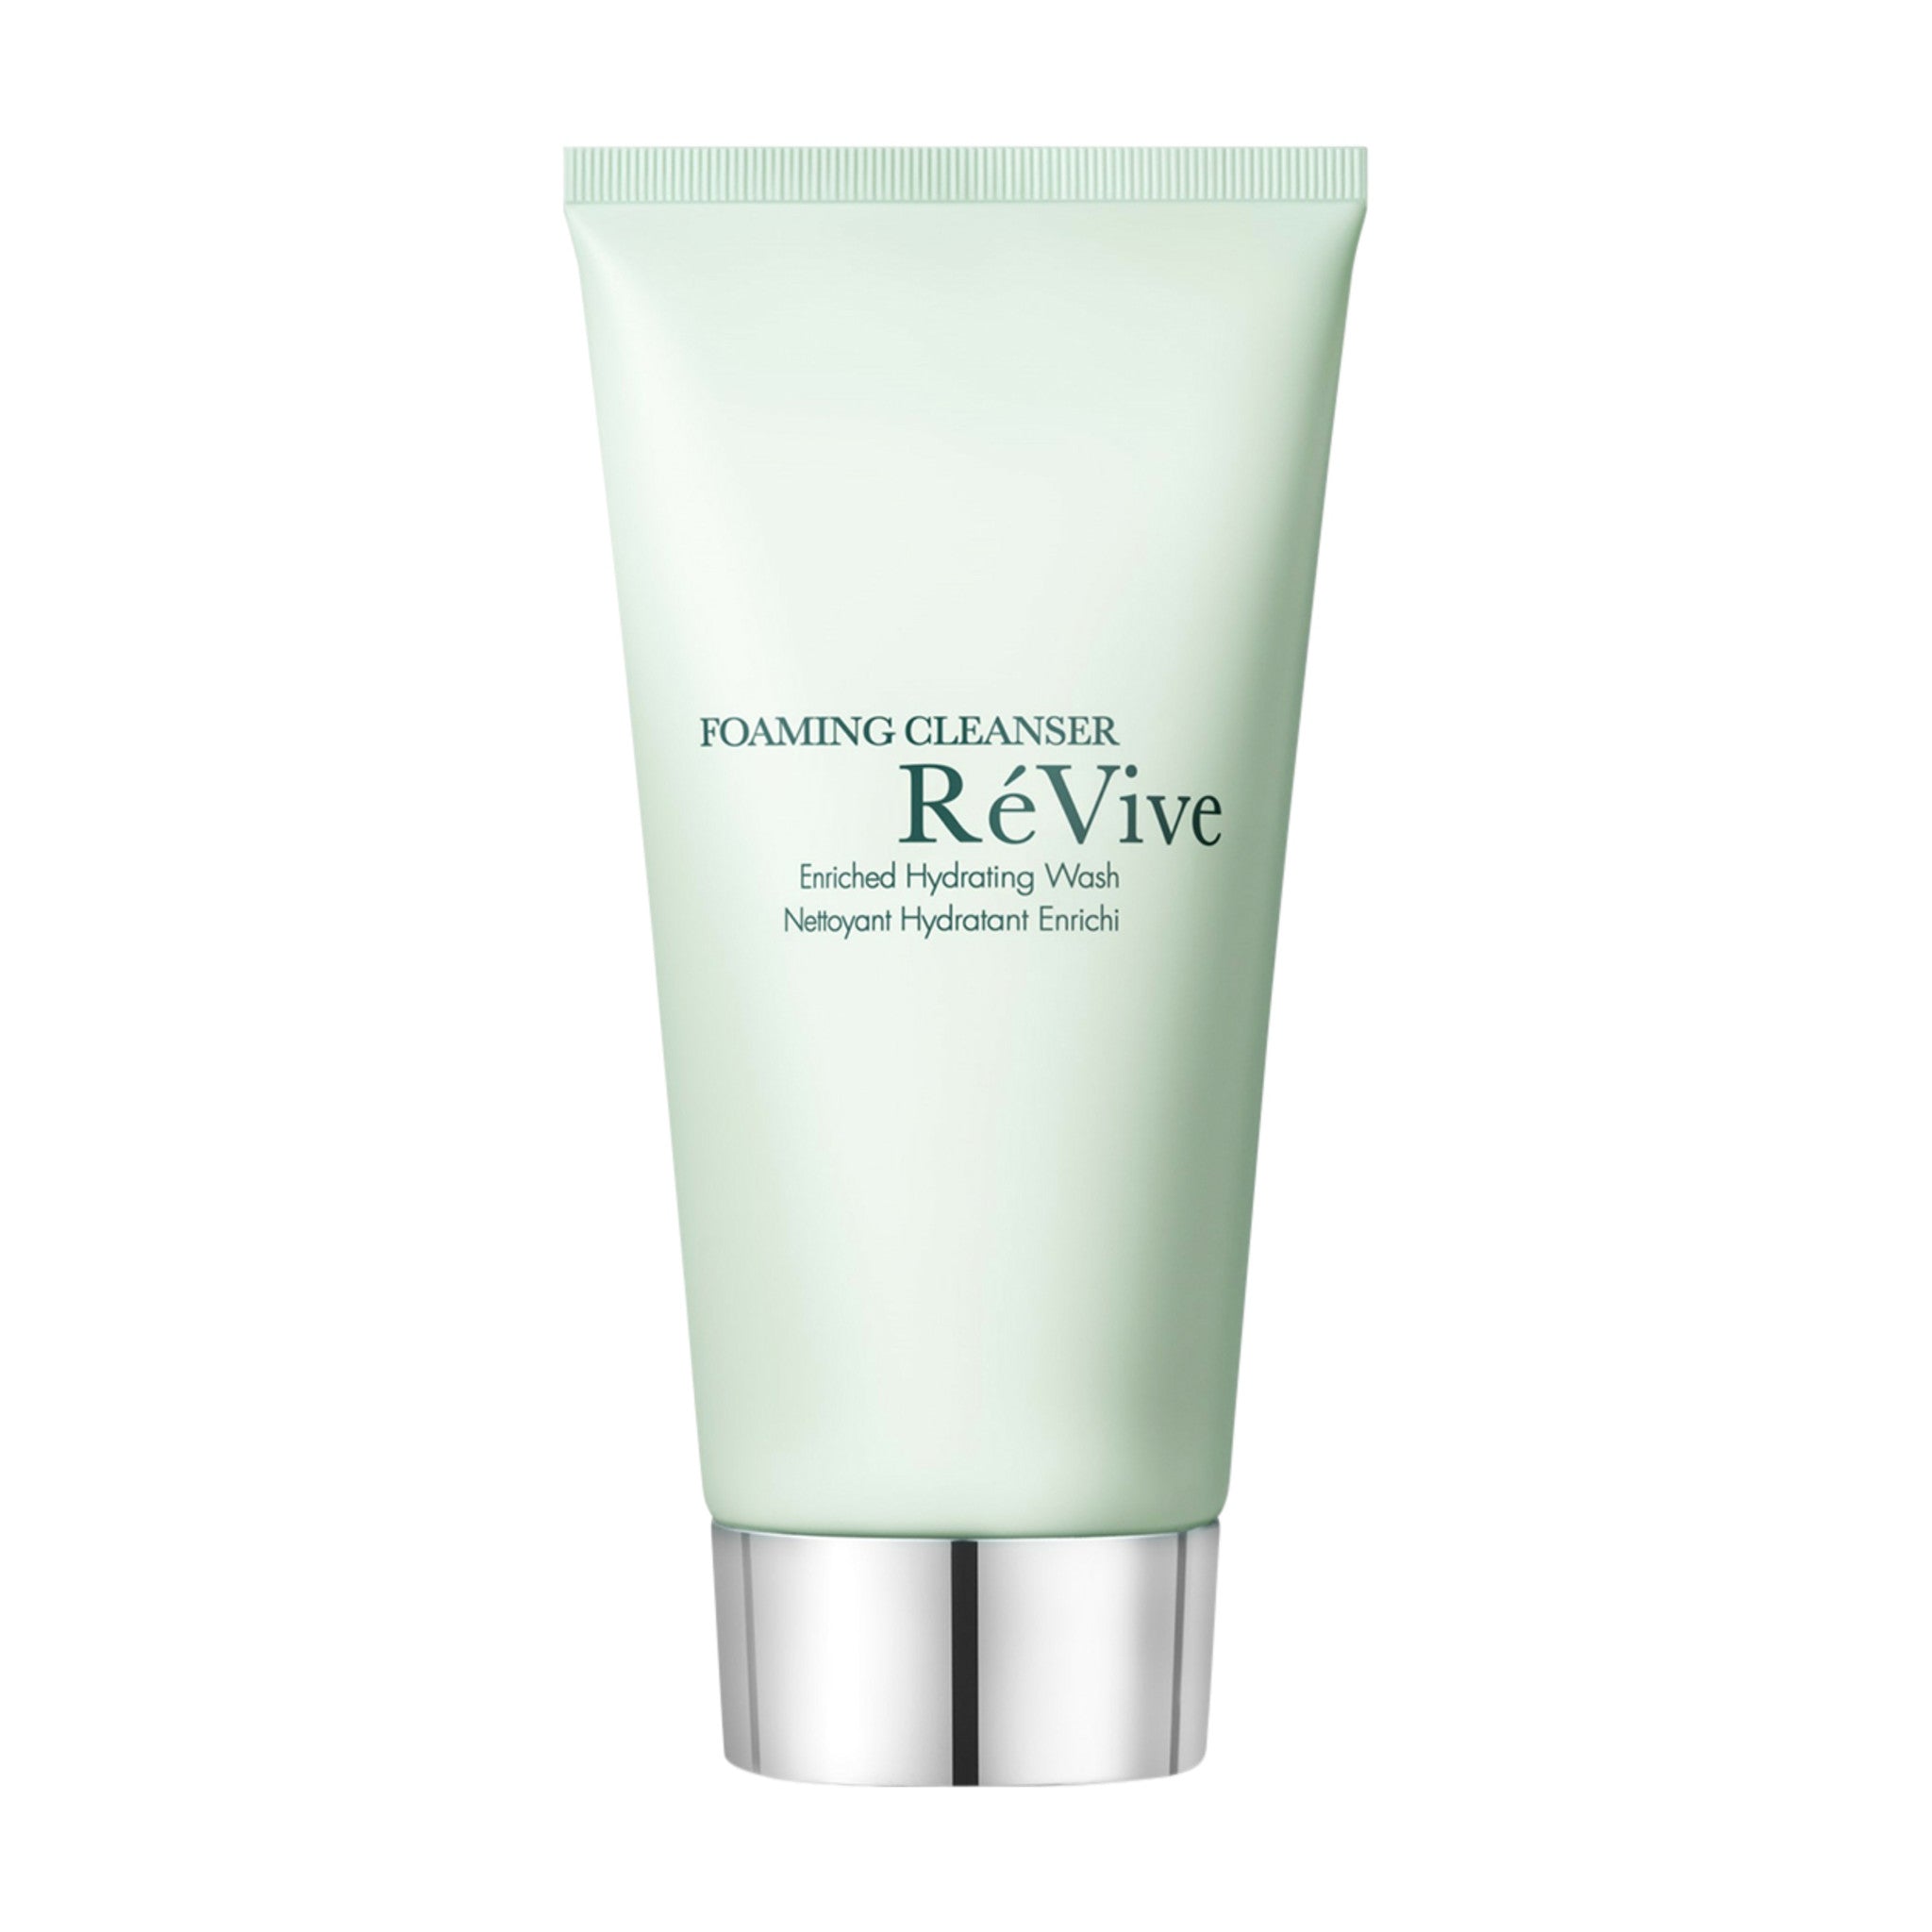 RéVive Foaming Cleanser Enriched Hydrating Wash main image.